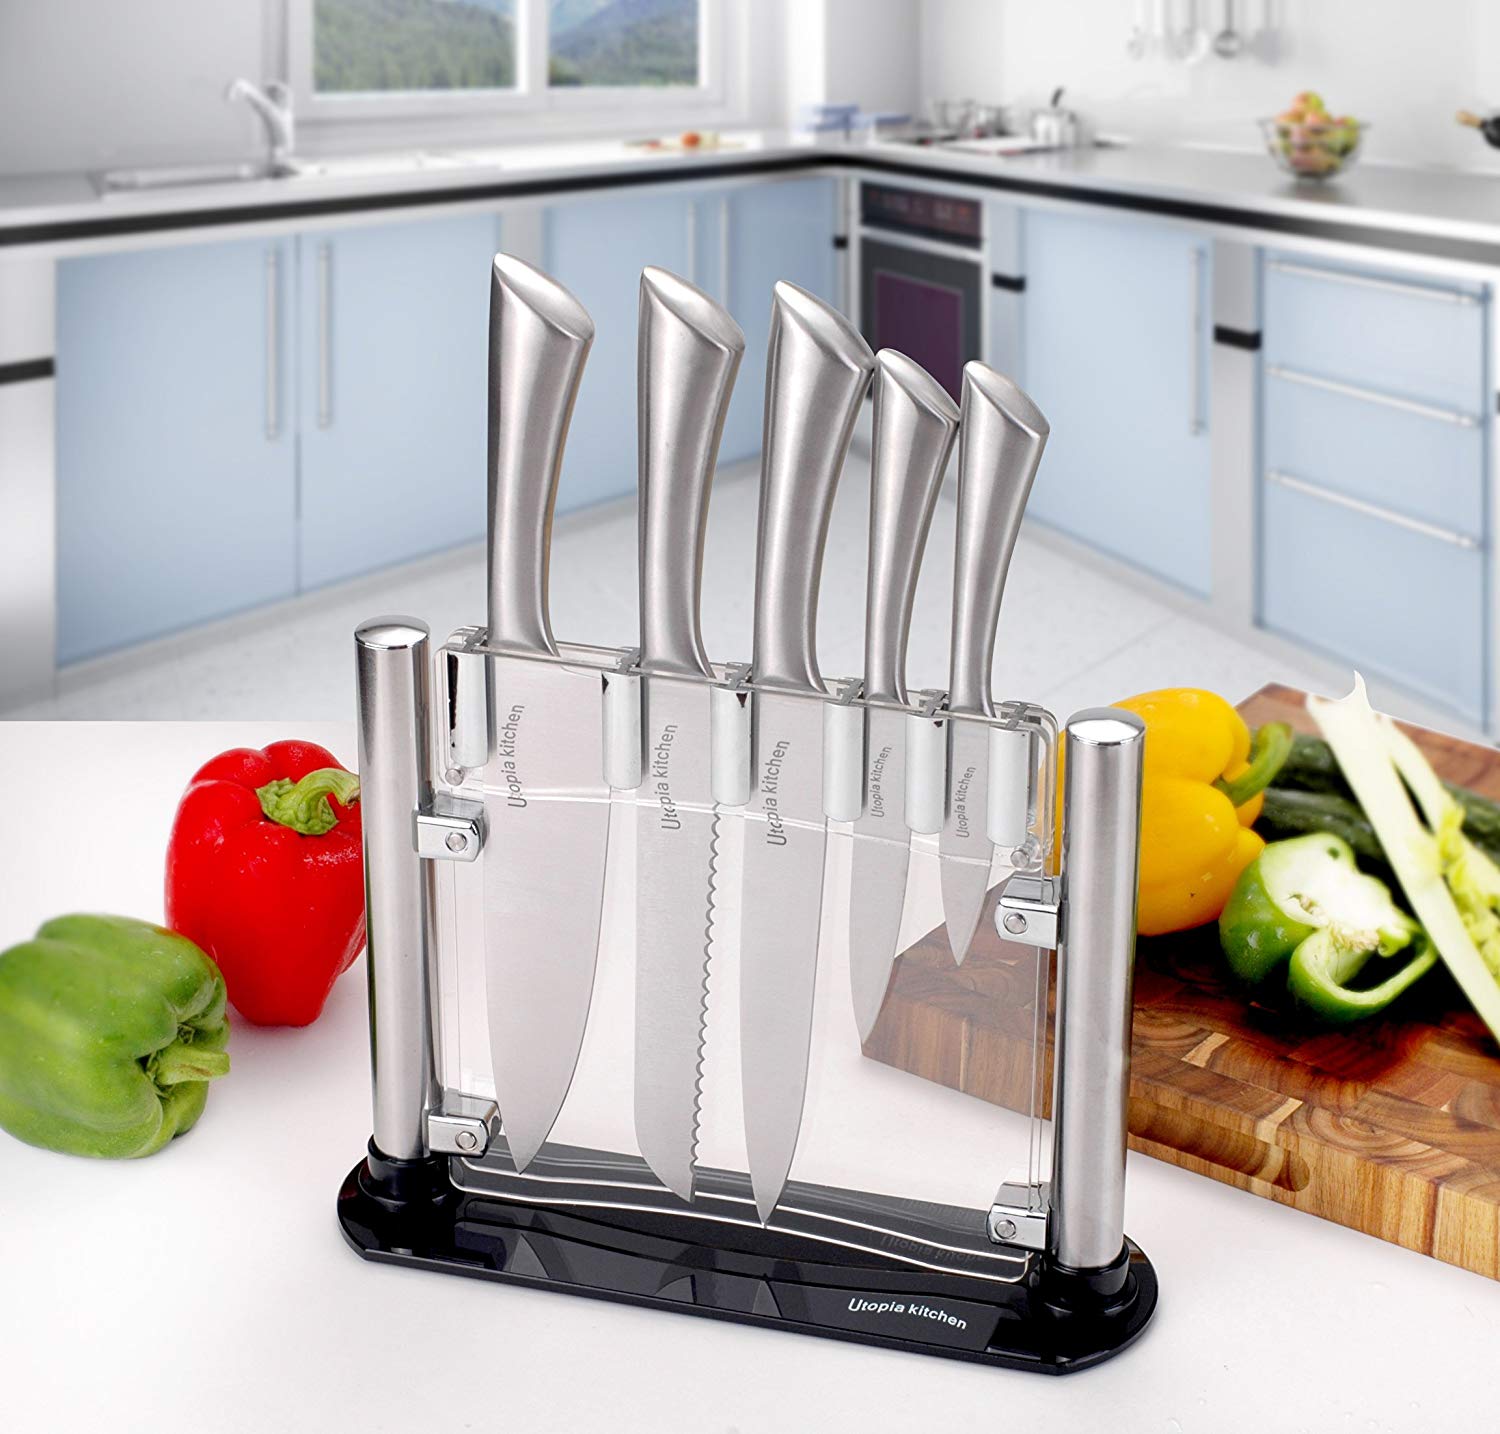 6 Piece Stainless Steel Kitchen Knife Set Pink with Knives Stand